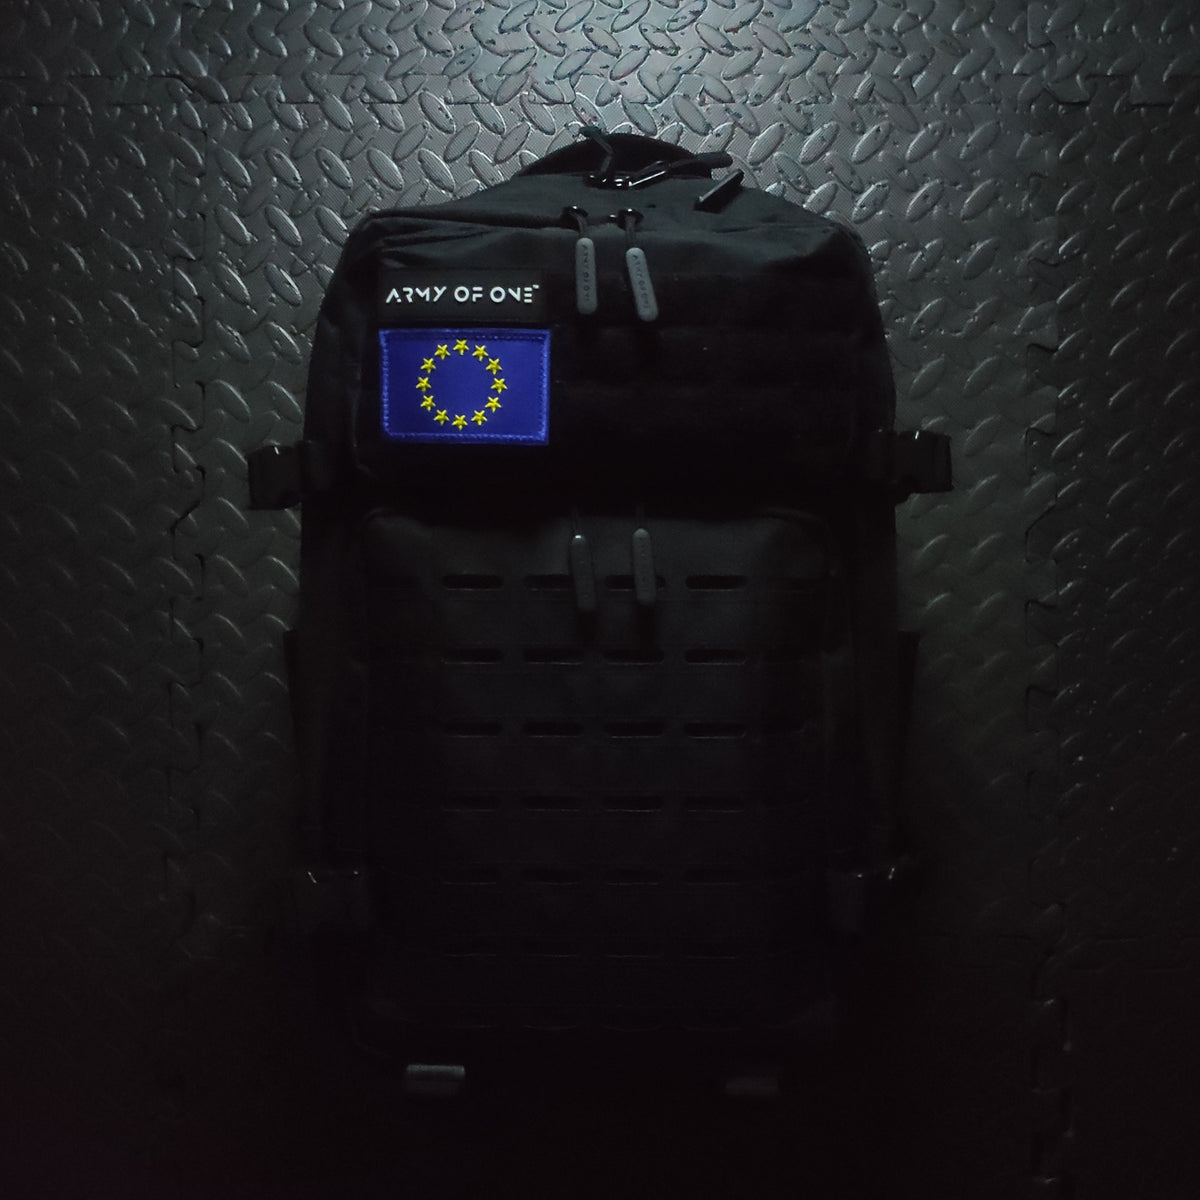 BLACK 45 LITRE ARMY OF ONE BACKPACK WITH VELCRO EUROPE PATCH ATTACHED